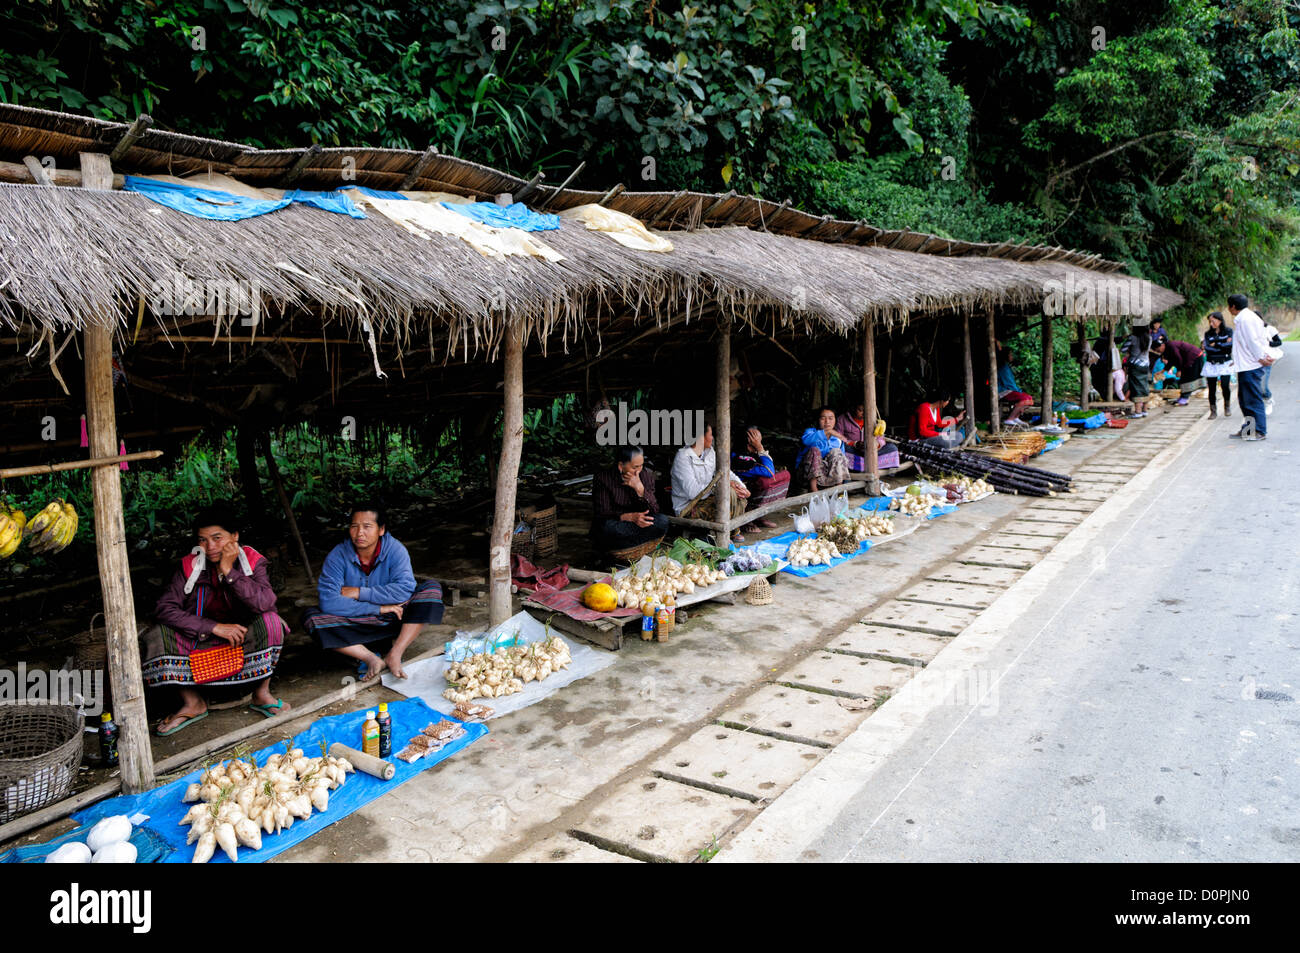 LUANG NAMTHA, Laos - A roadside market where vendors sell food and other items in Luang Namtha province in northern Laos. Stock Photo